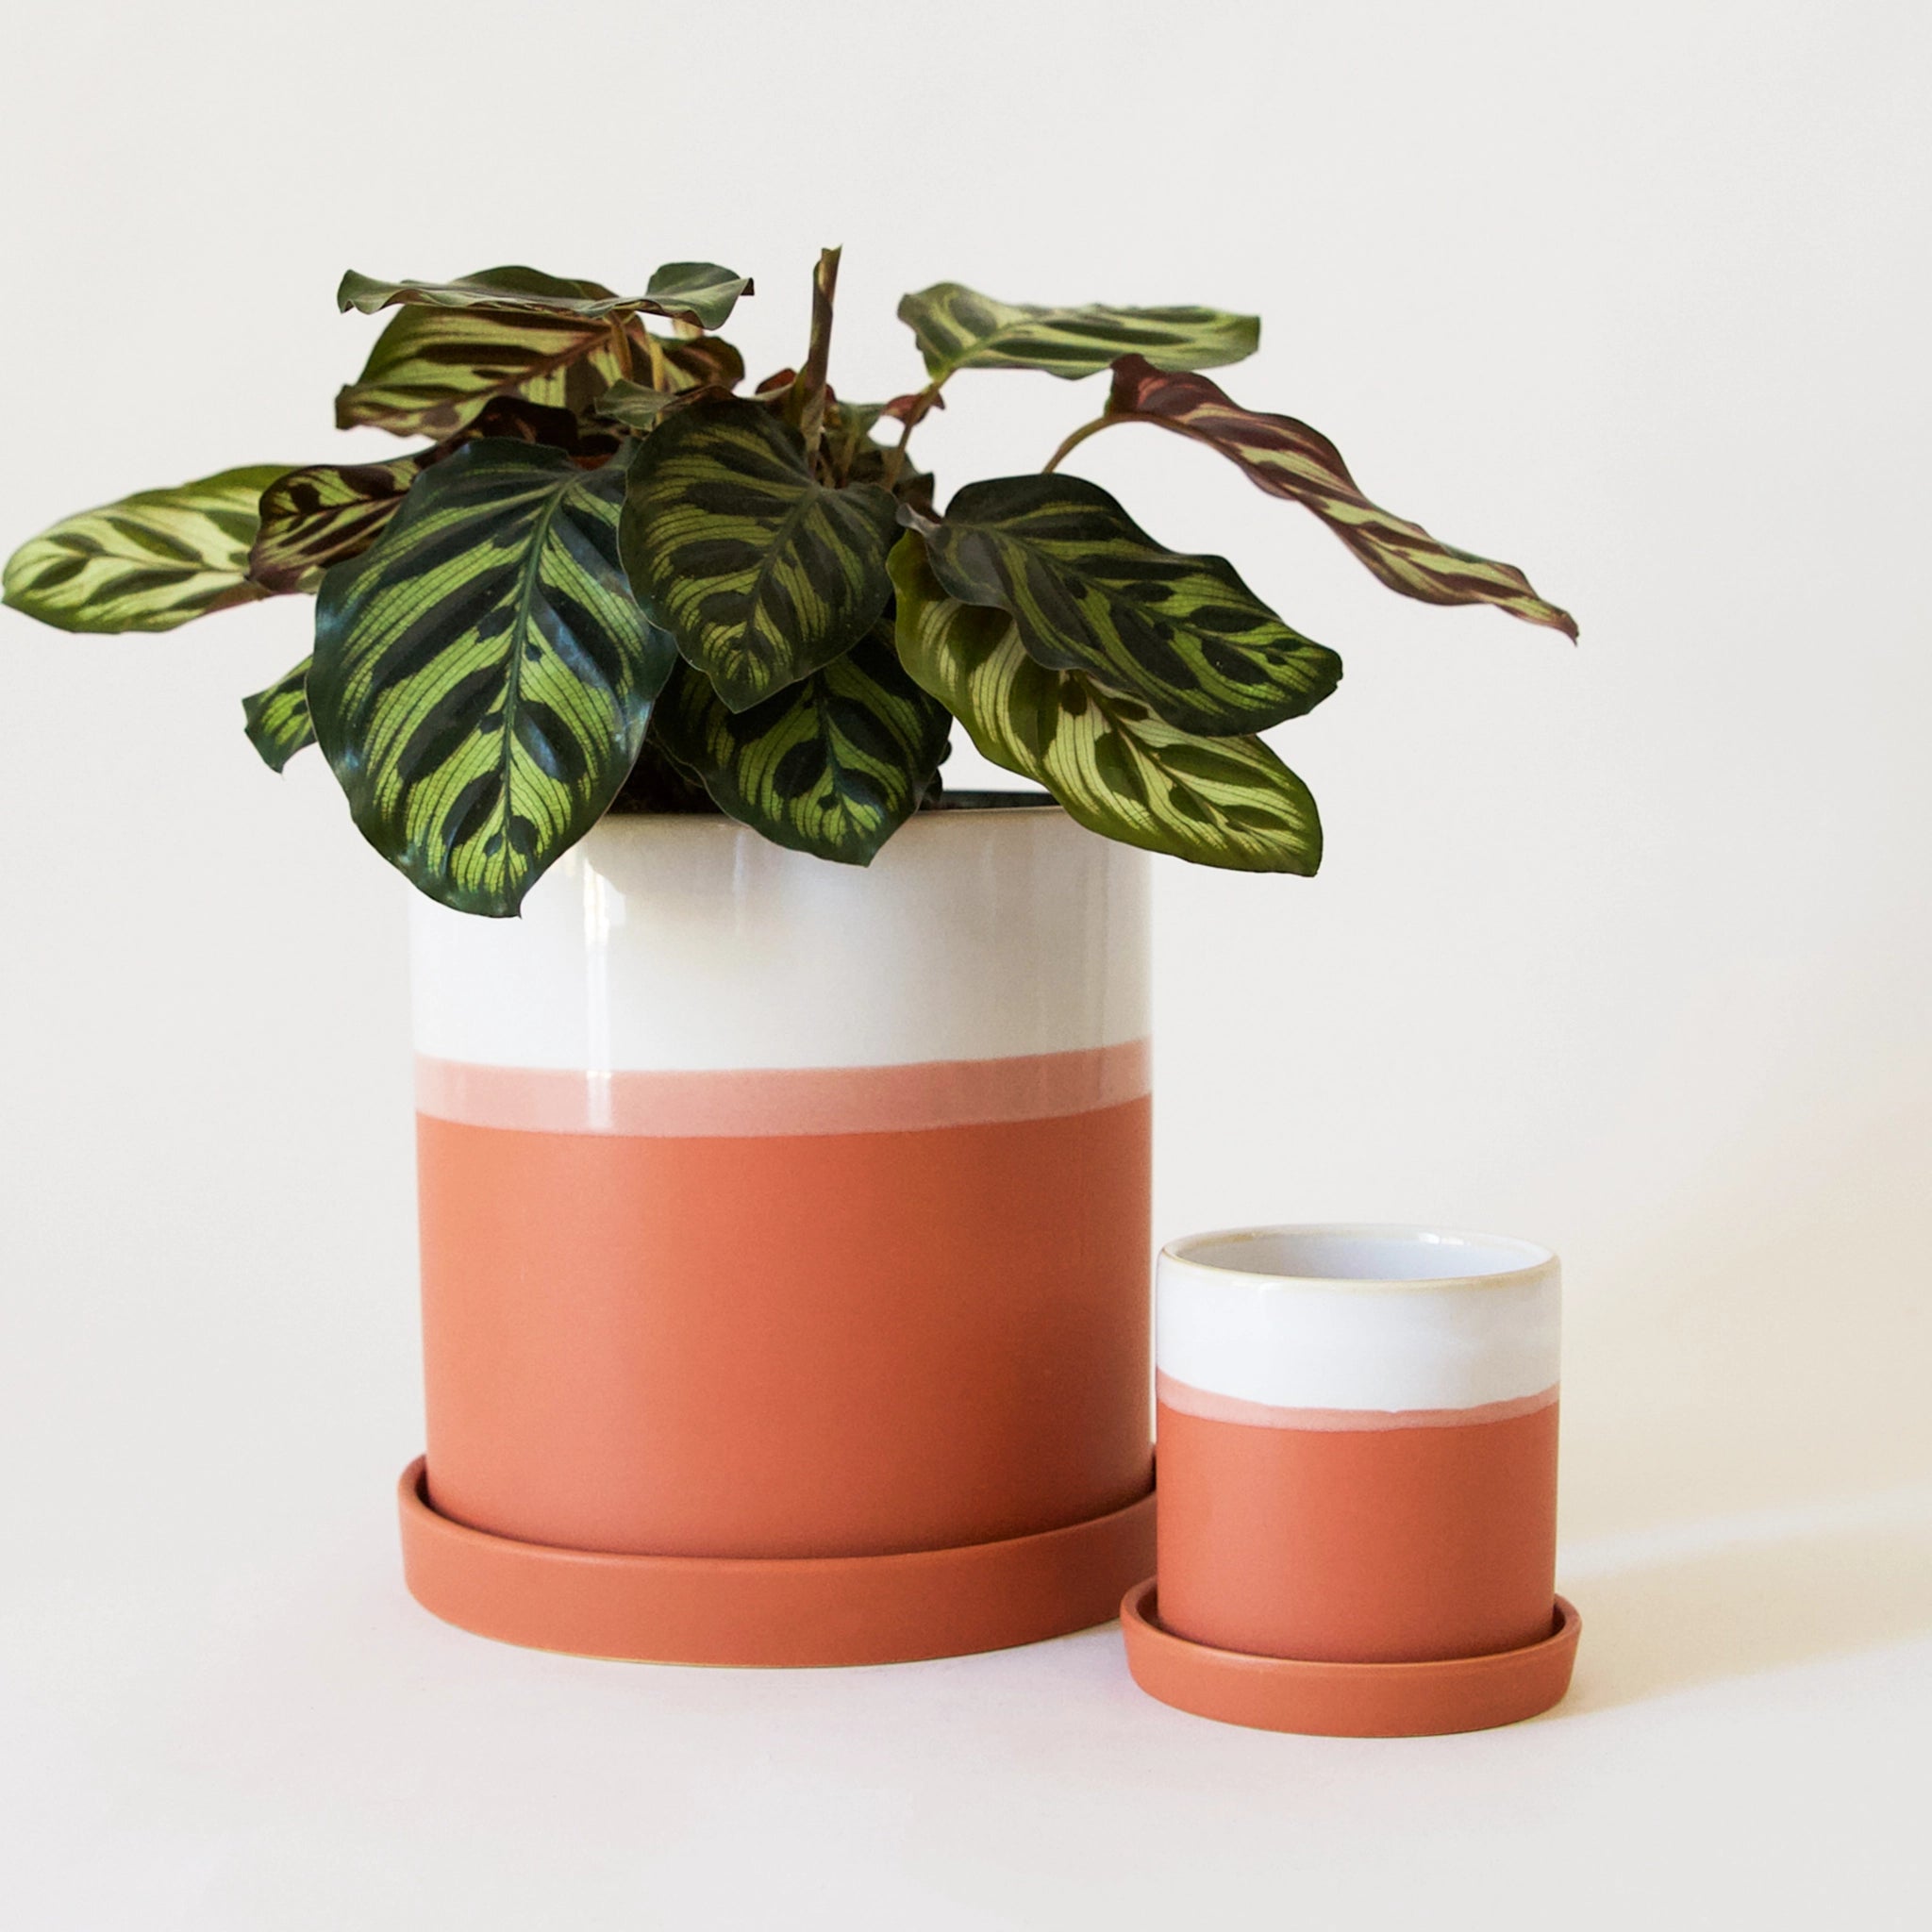 A large terracotta pot with matching saucer features a white glaze finish on the top half of the pot. it is filled with a lush green plant and sits next to an empty smaller version of the same pot.